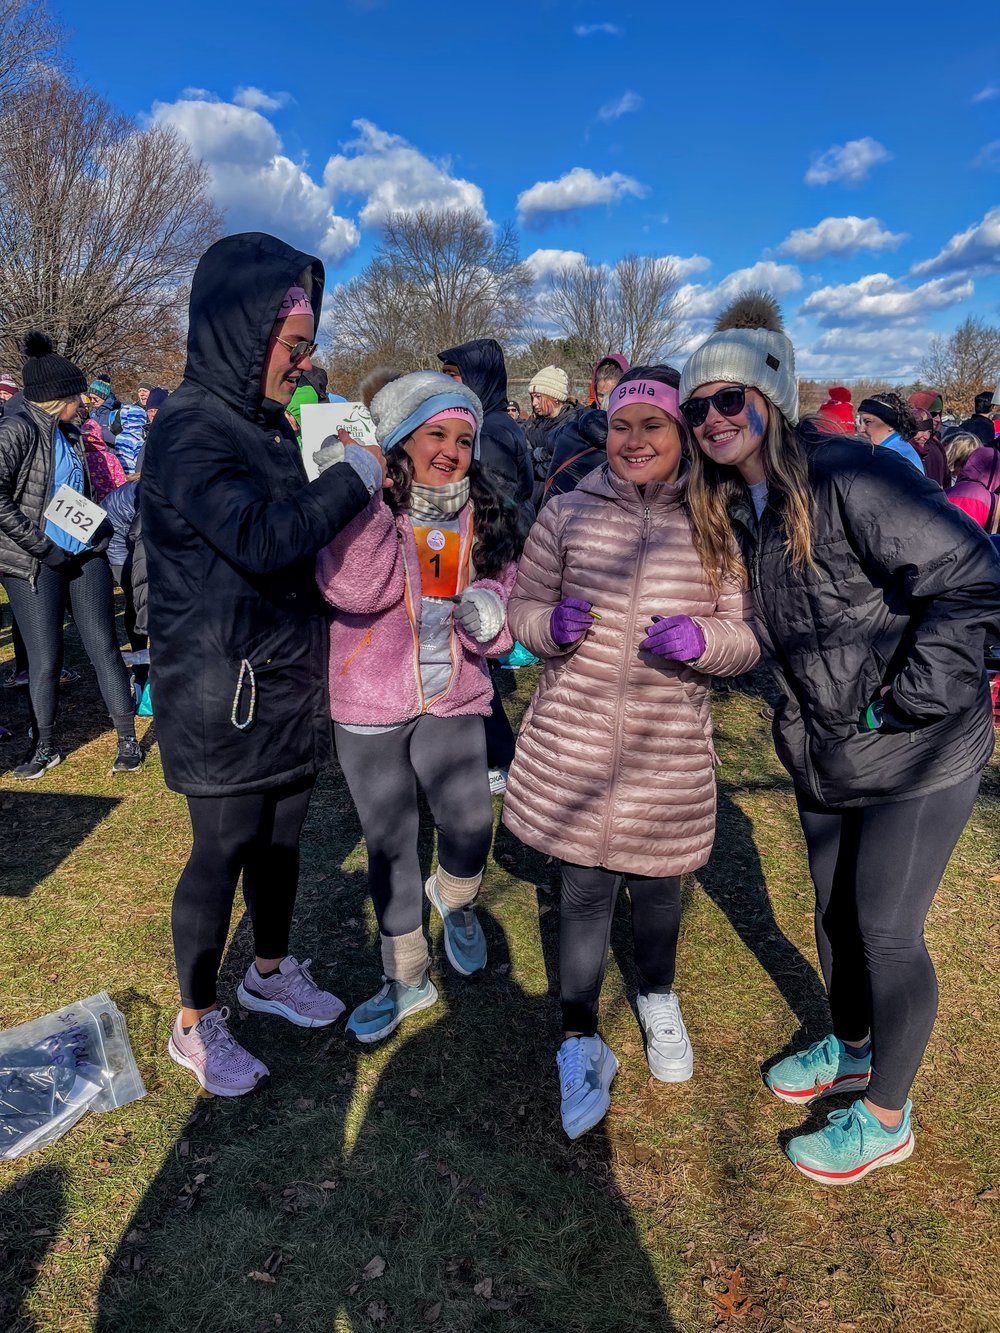   SPCS students joined local GOTR groups and finished off the season with an organization-wide 5K! Staff volunteers ran alongside students in support.   